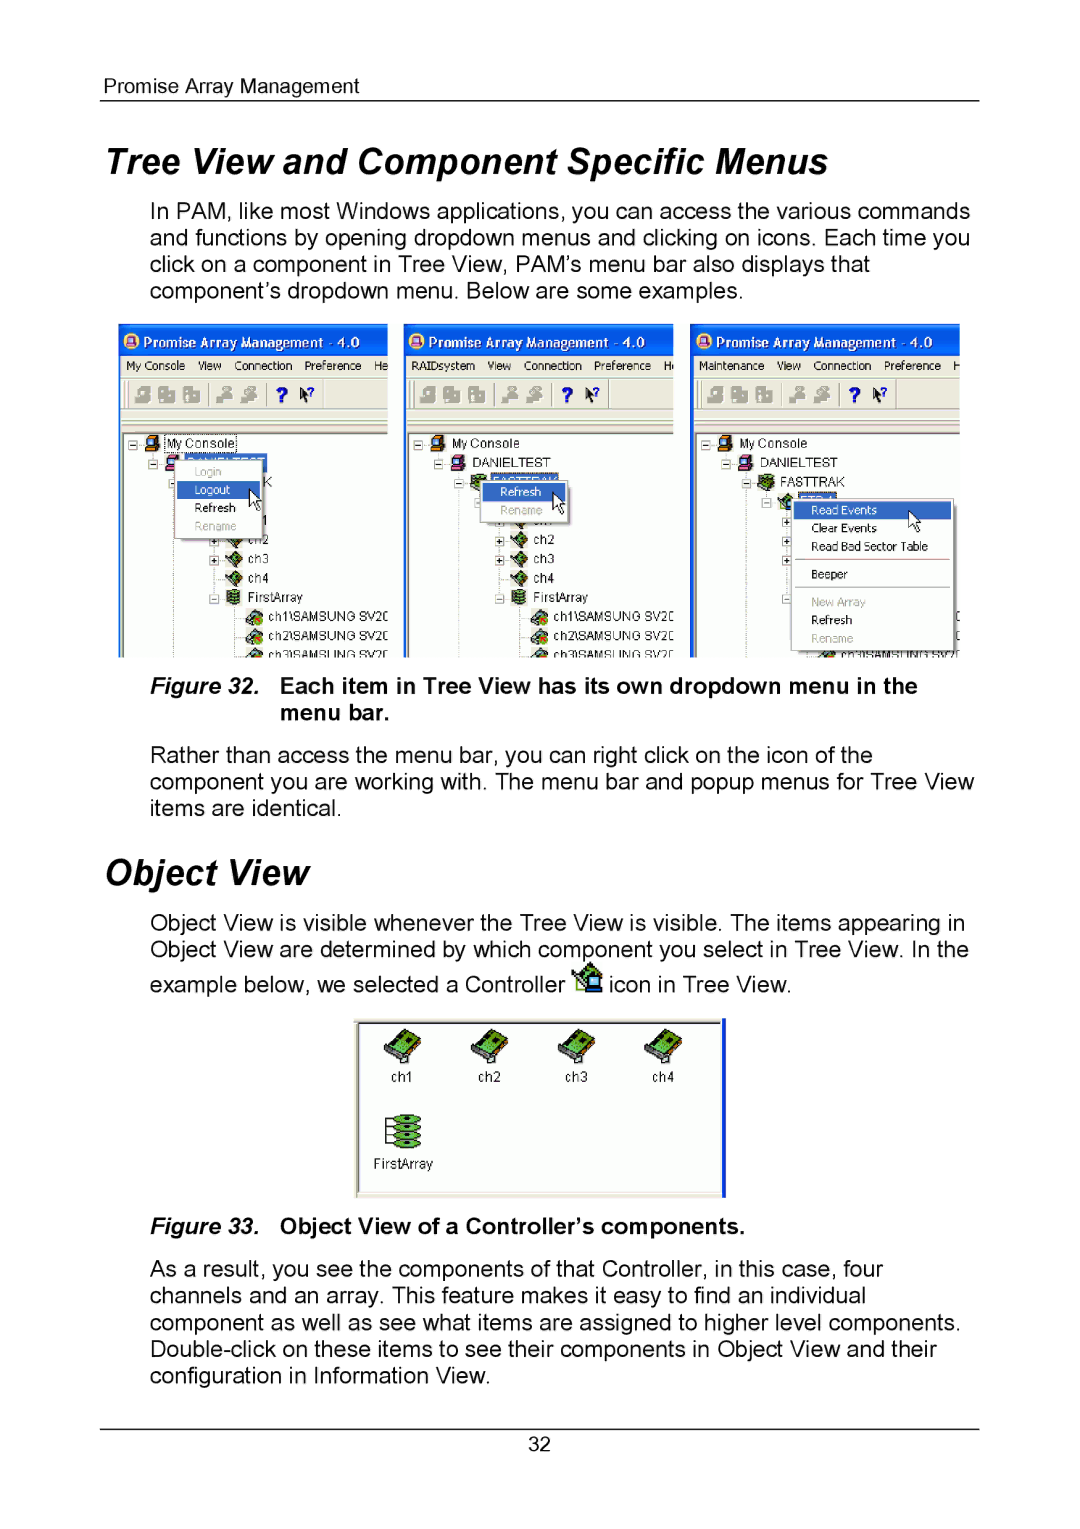 Promise Technology Version 4.4 user manual Tree View and Component Specific Menus, Object View 